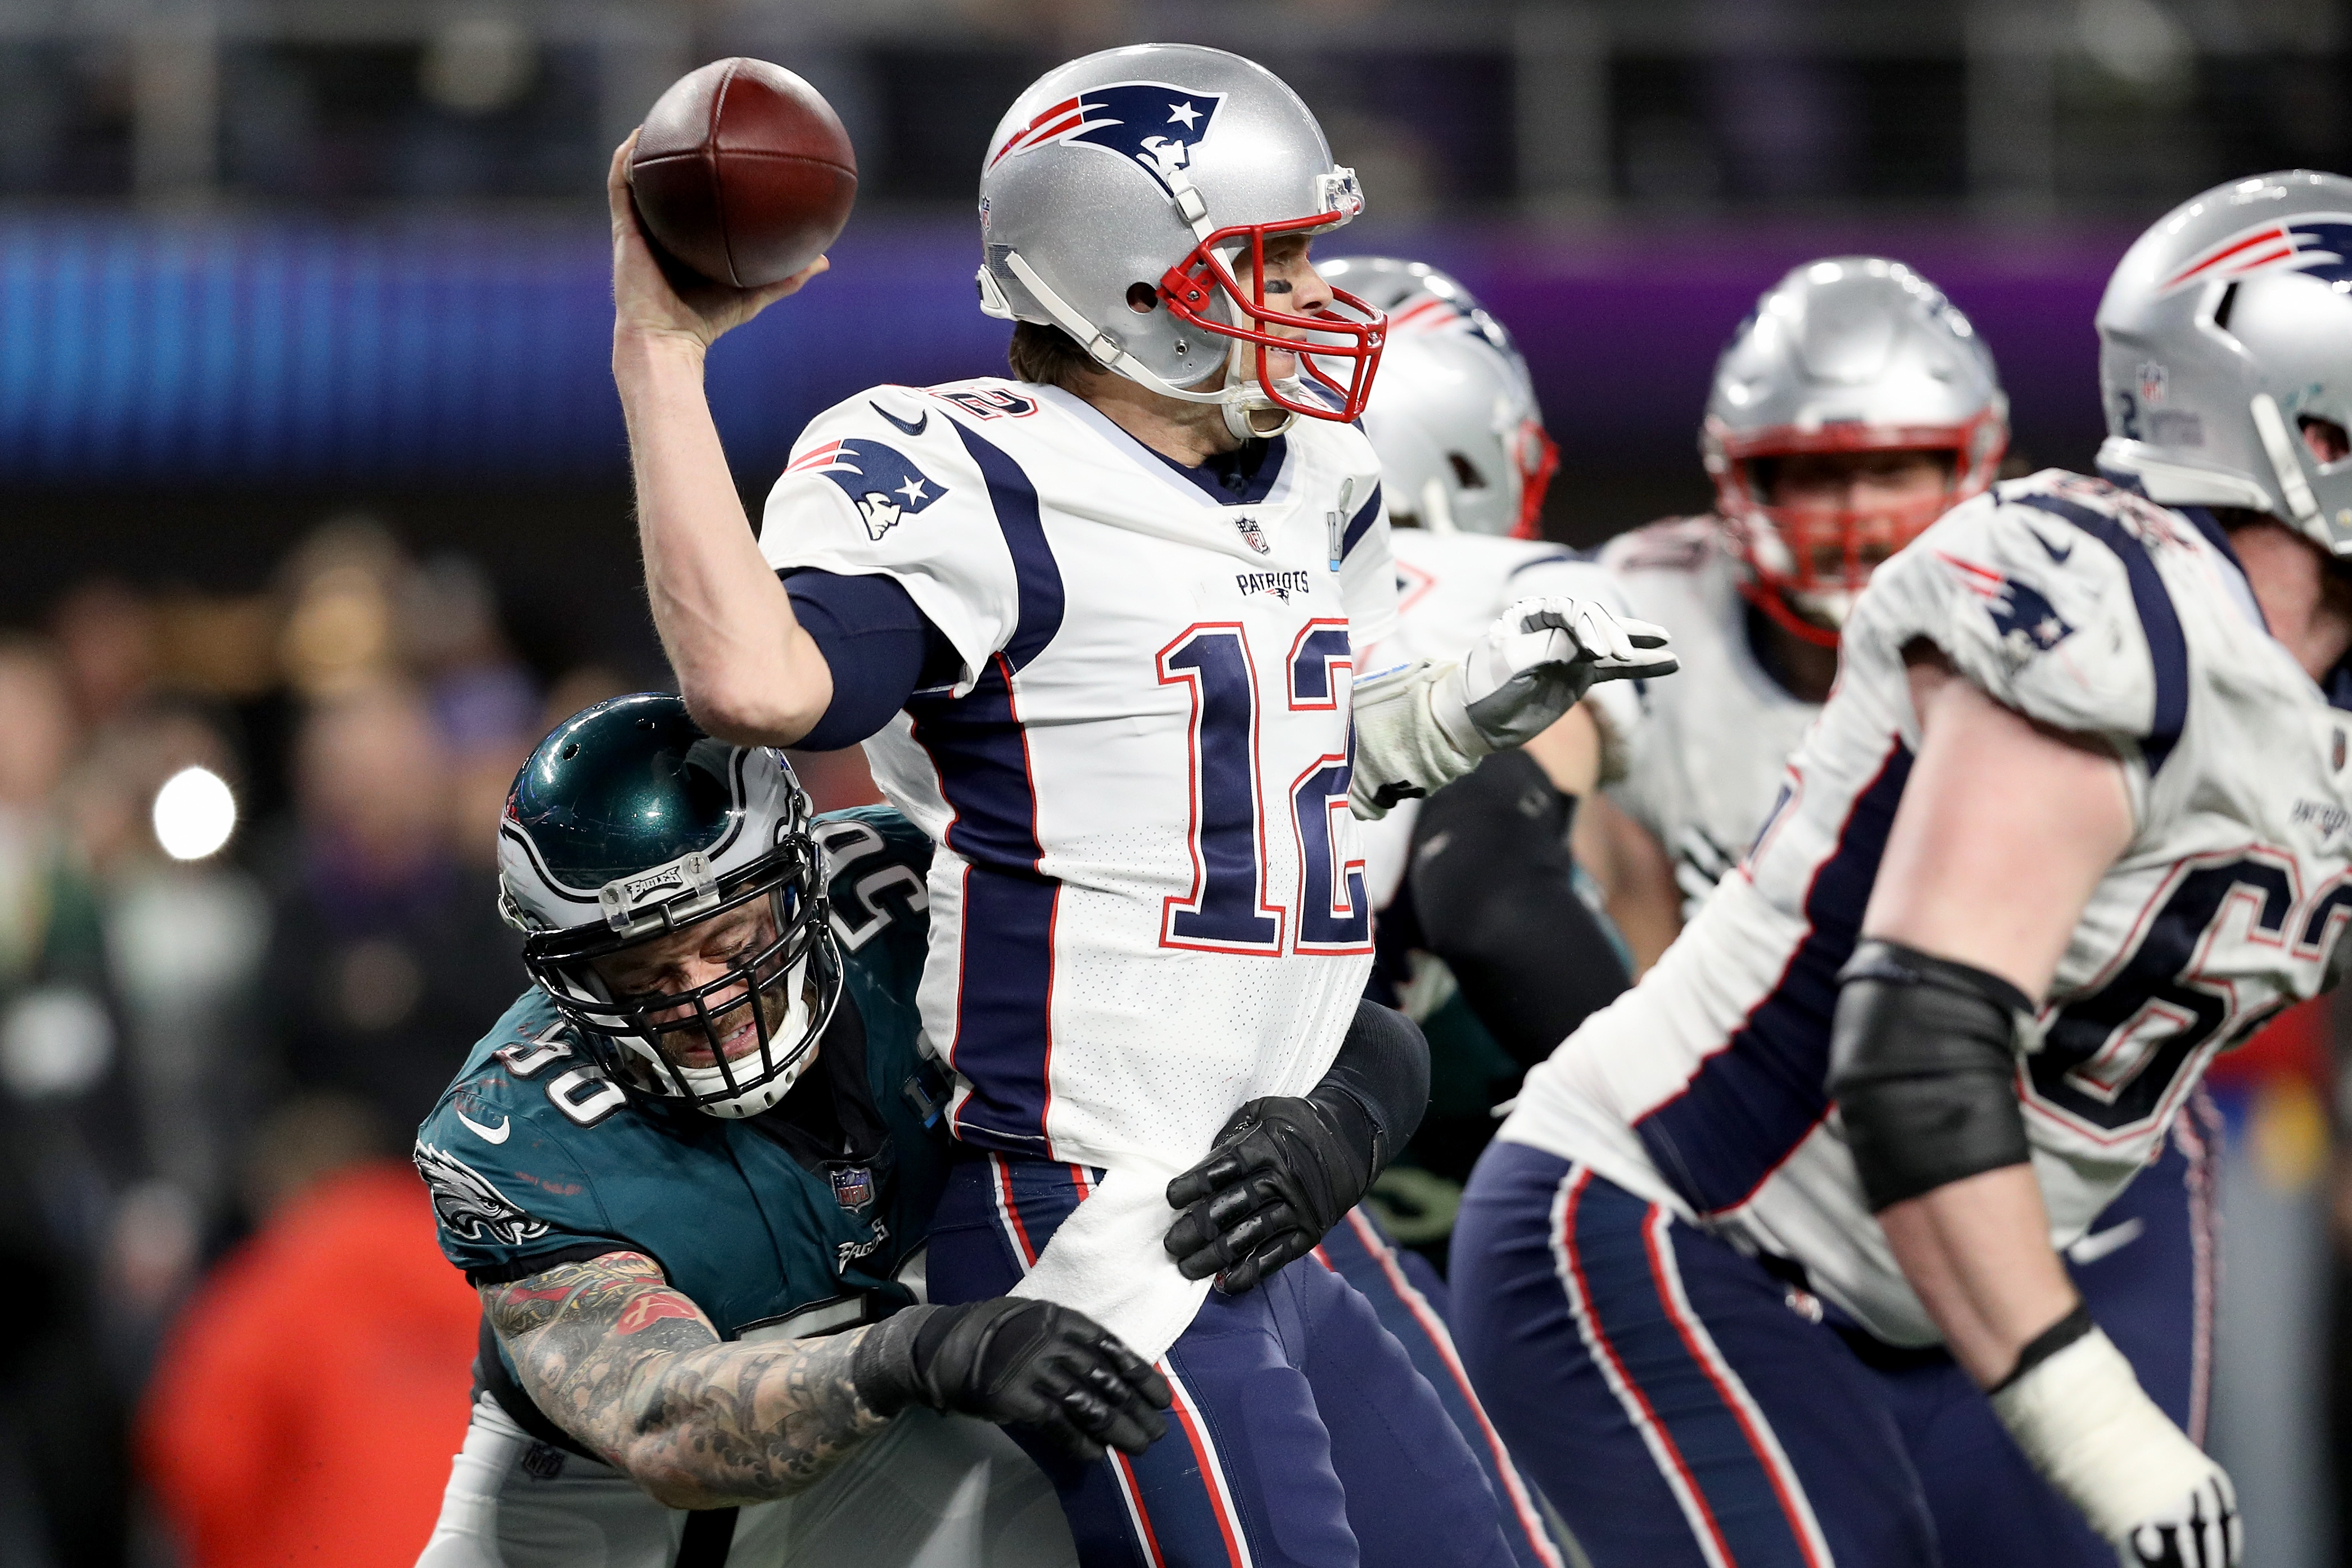 Super Bowl Record: Most Passing Yards by a Player in Super Bowl History